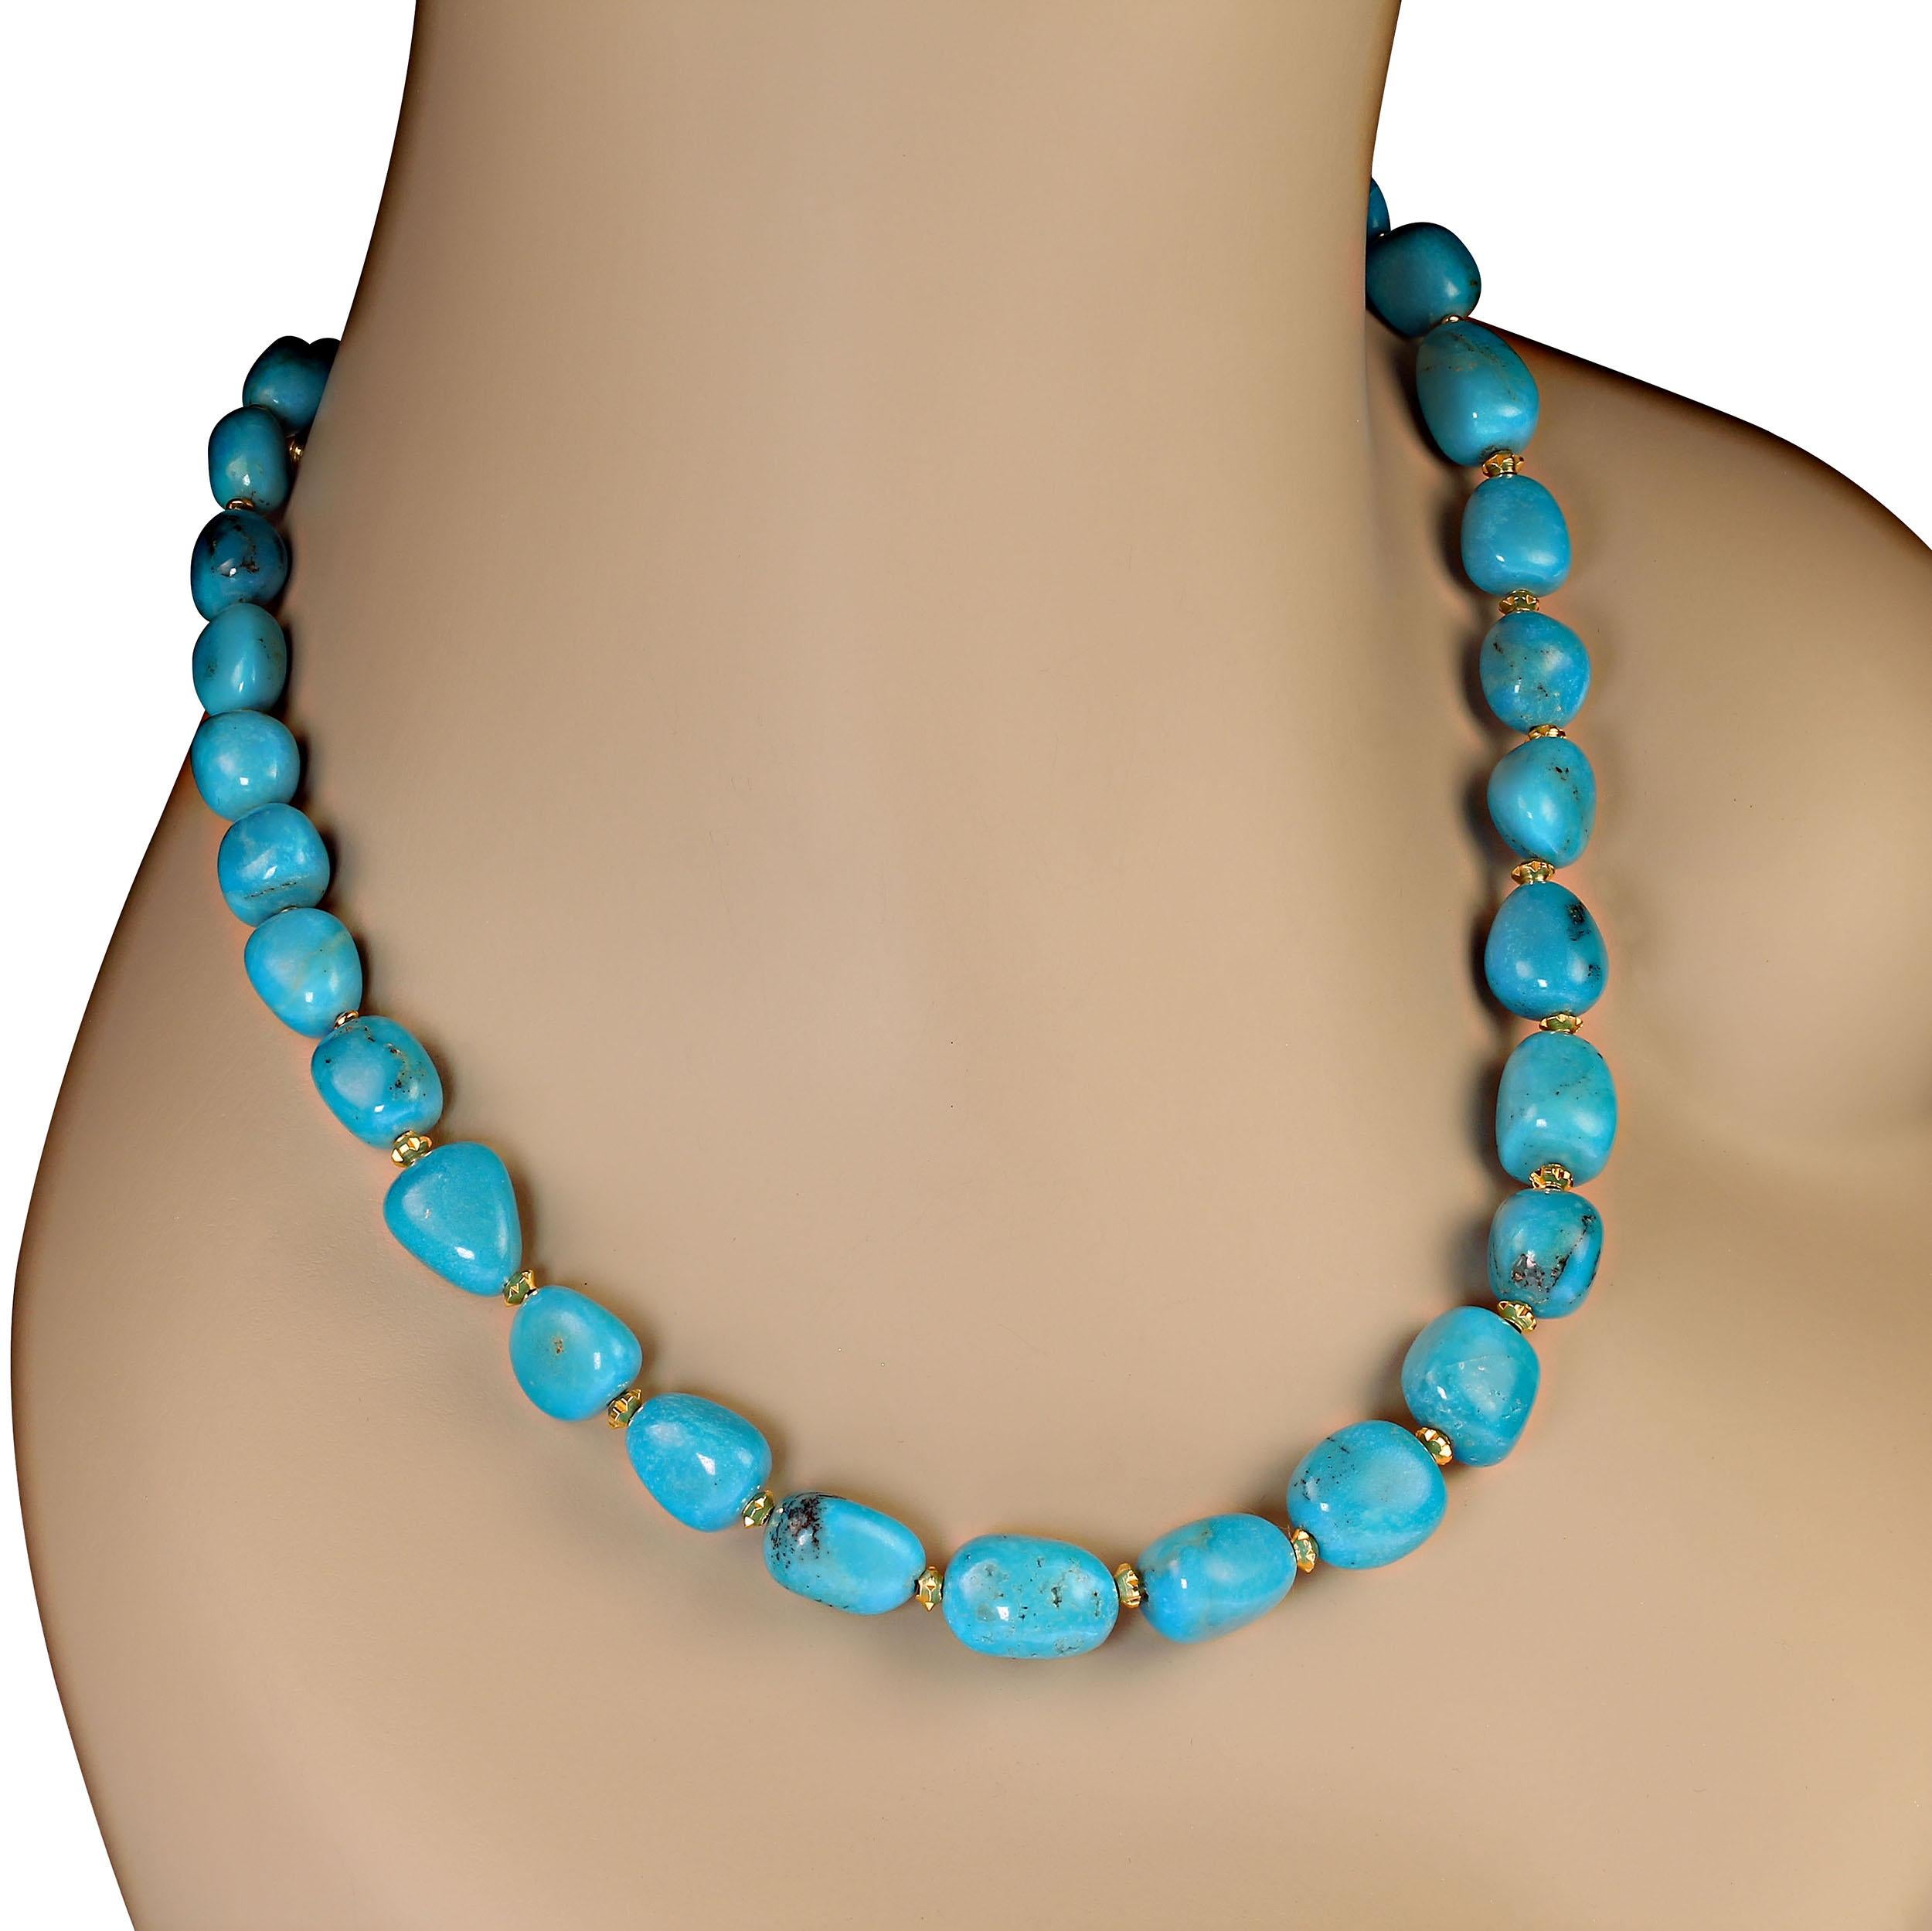 Artisan AJD Stunning Sleeping Beauty Turquoise Nugget Necklace